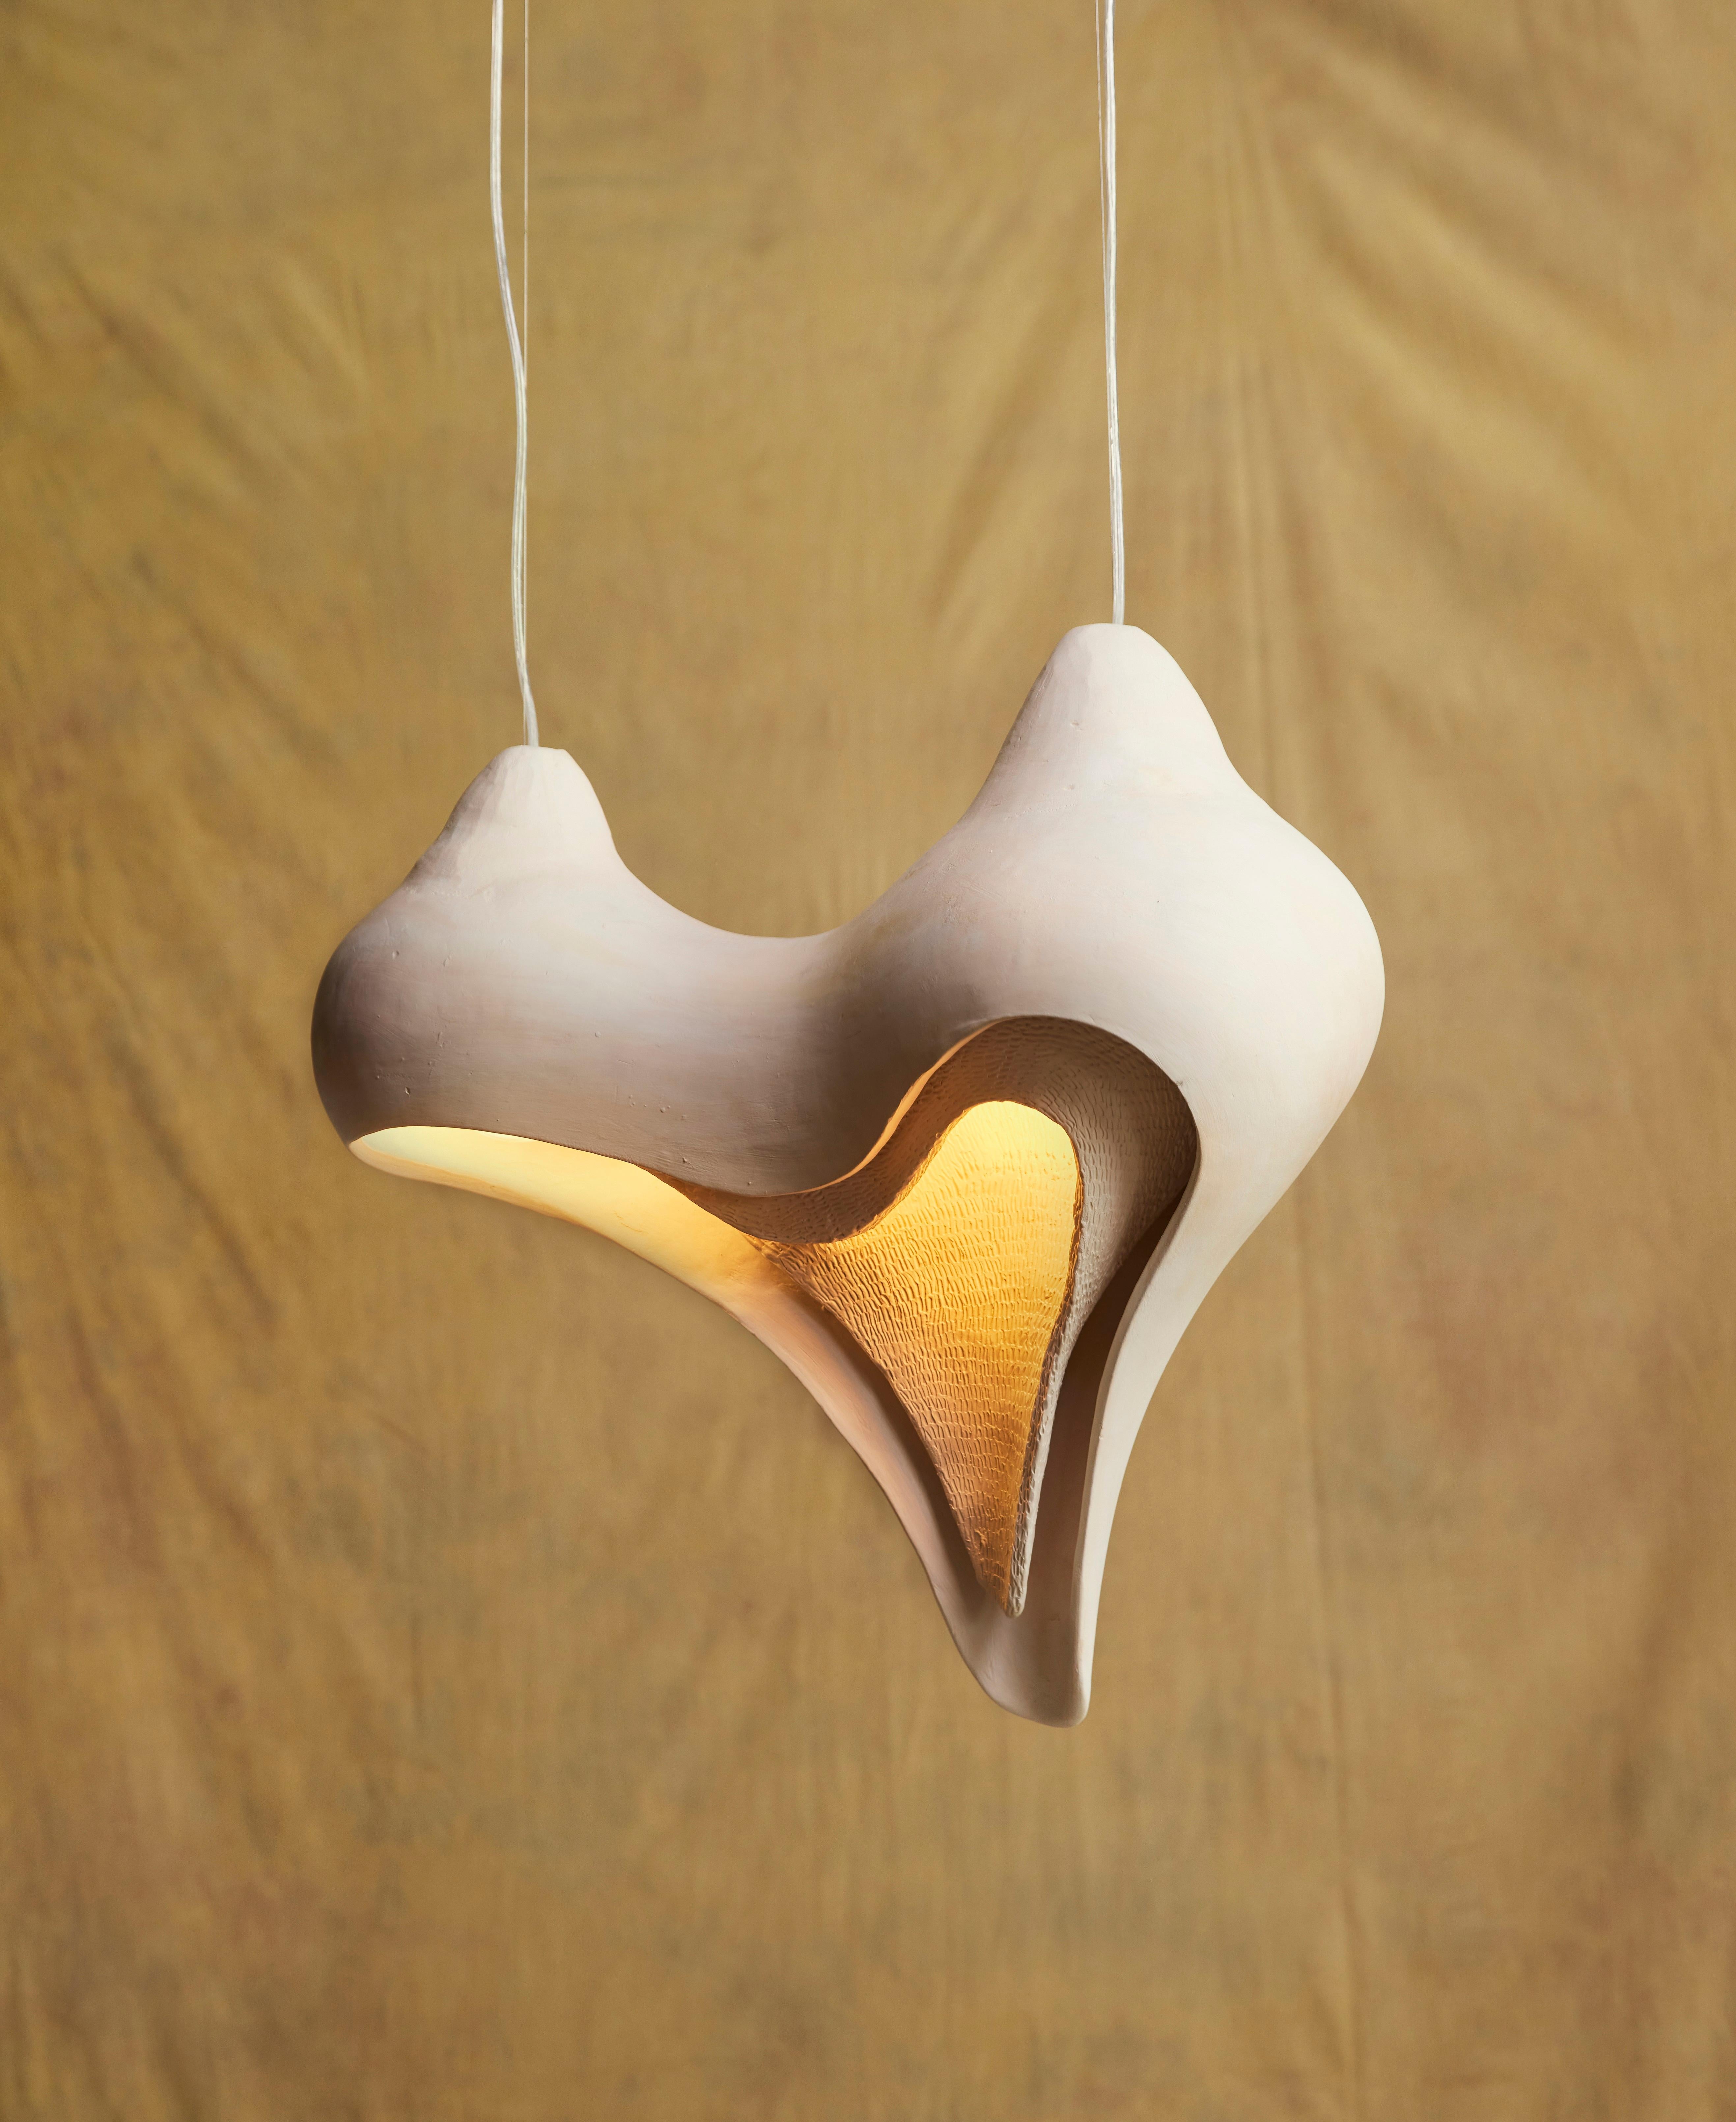 Large womb pendant lamp by Jan Ernst
Dimensions: D 28 W 60 H 55 cm
Materials: White stoneware


The Origin Collection is a collaboration between Jan Ernst and Colin Braye. The work translates the complexity and delicacy of biological and